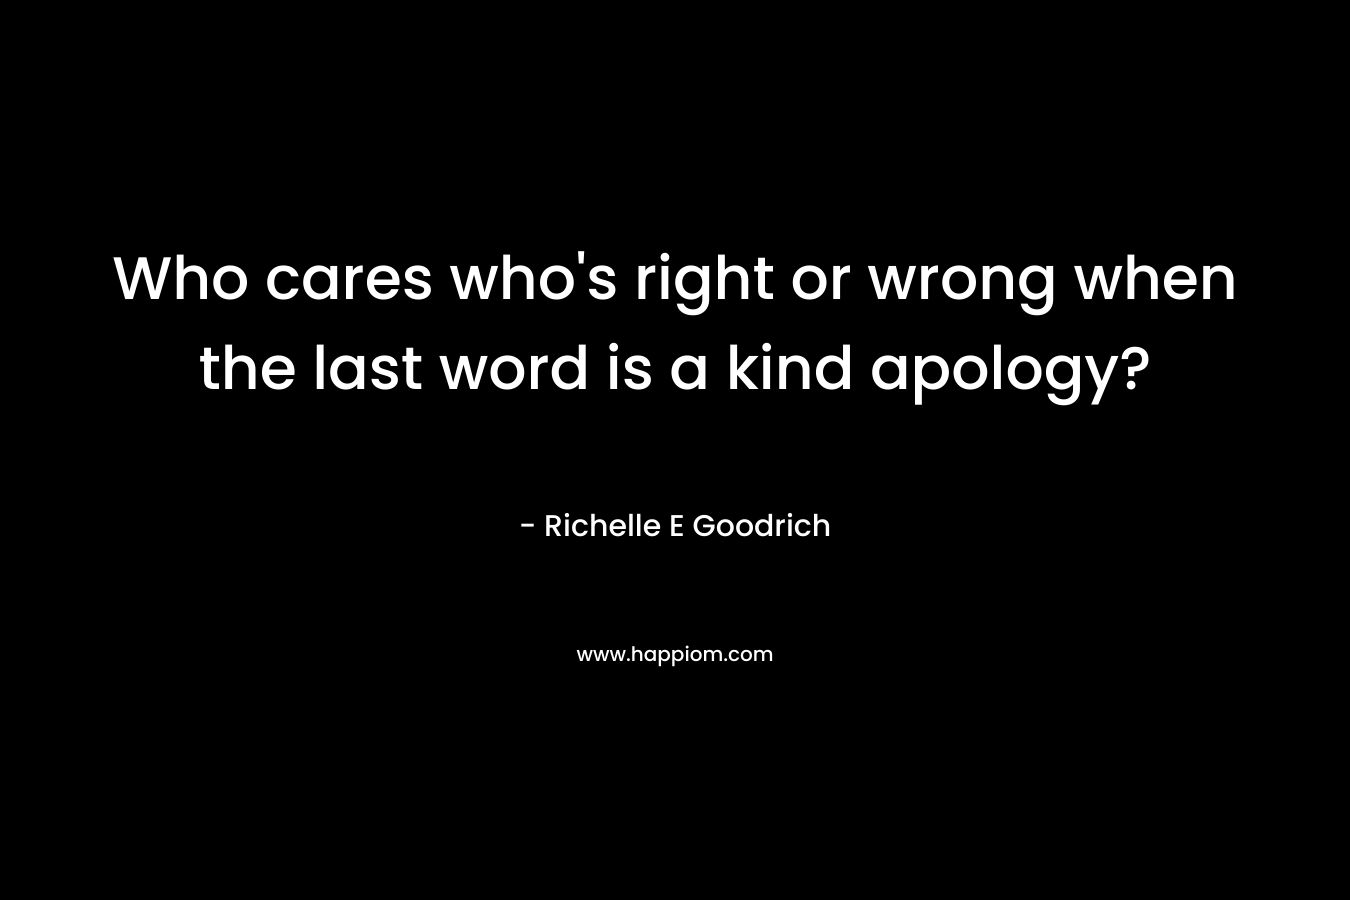 Who cares who's right or wrong when the last word is a kind apology?